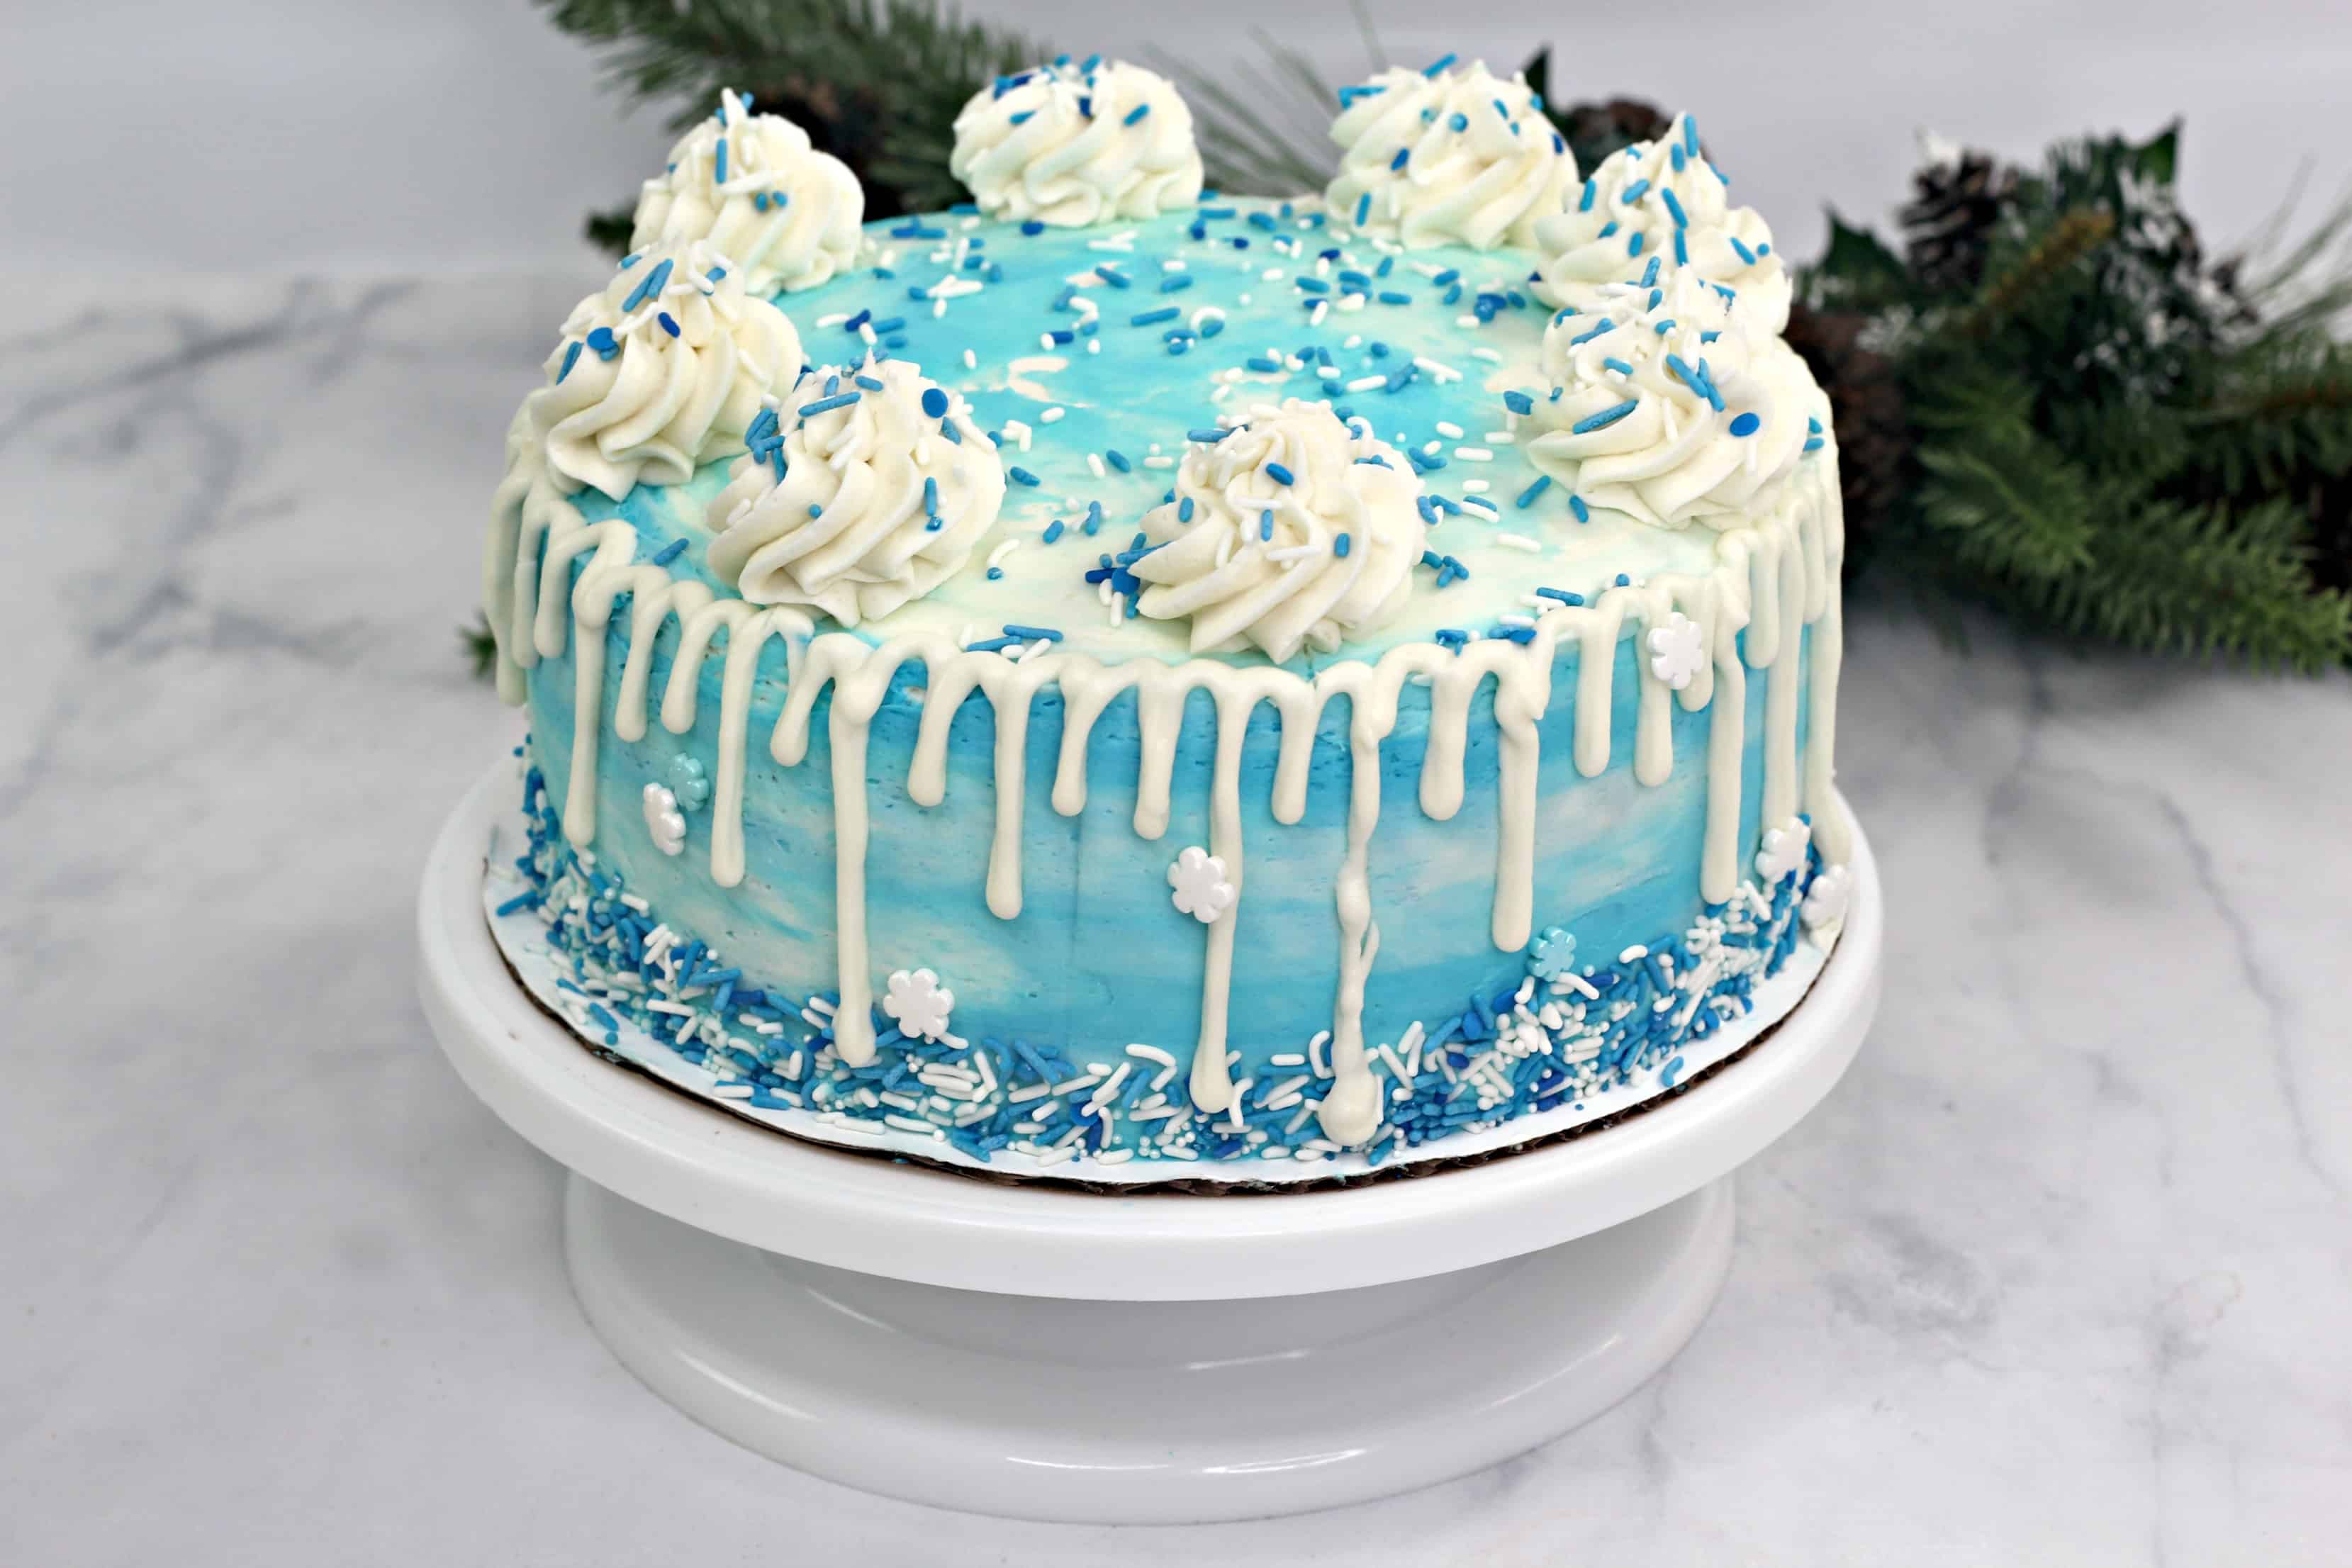 How to make the perfect Sparkle Cake for Frozen fans